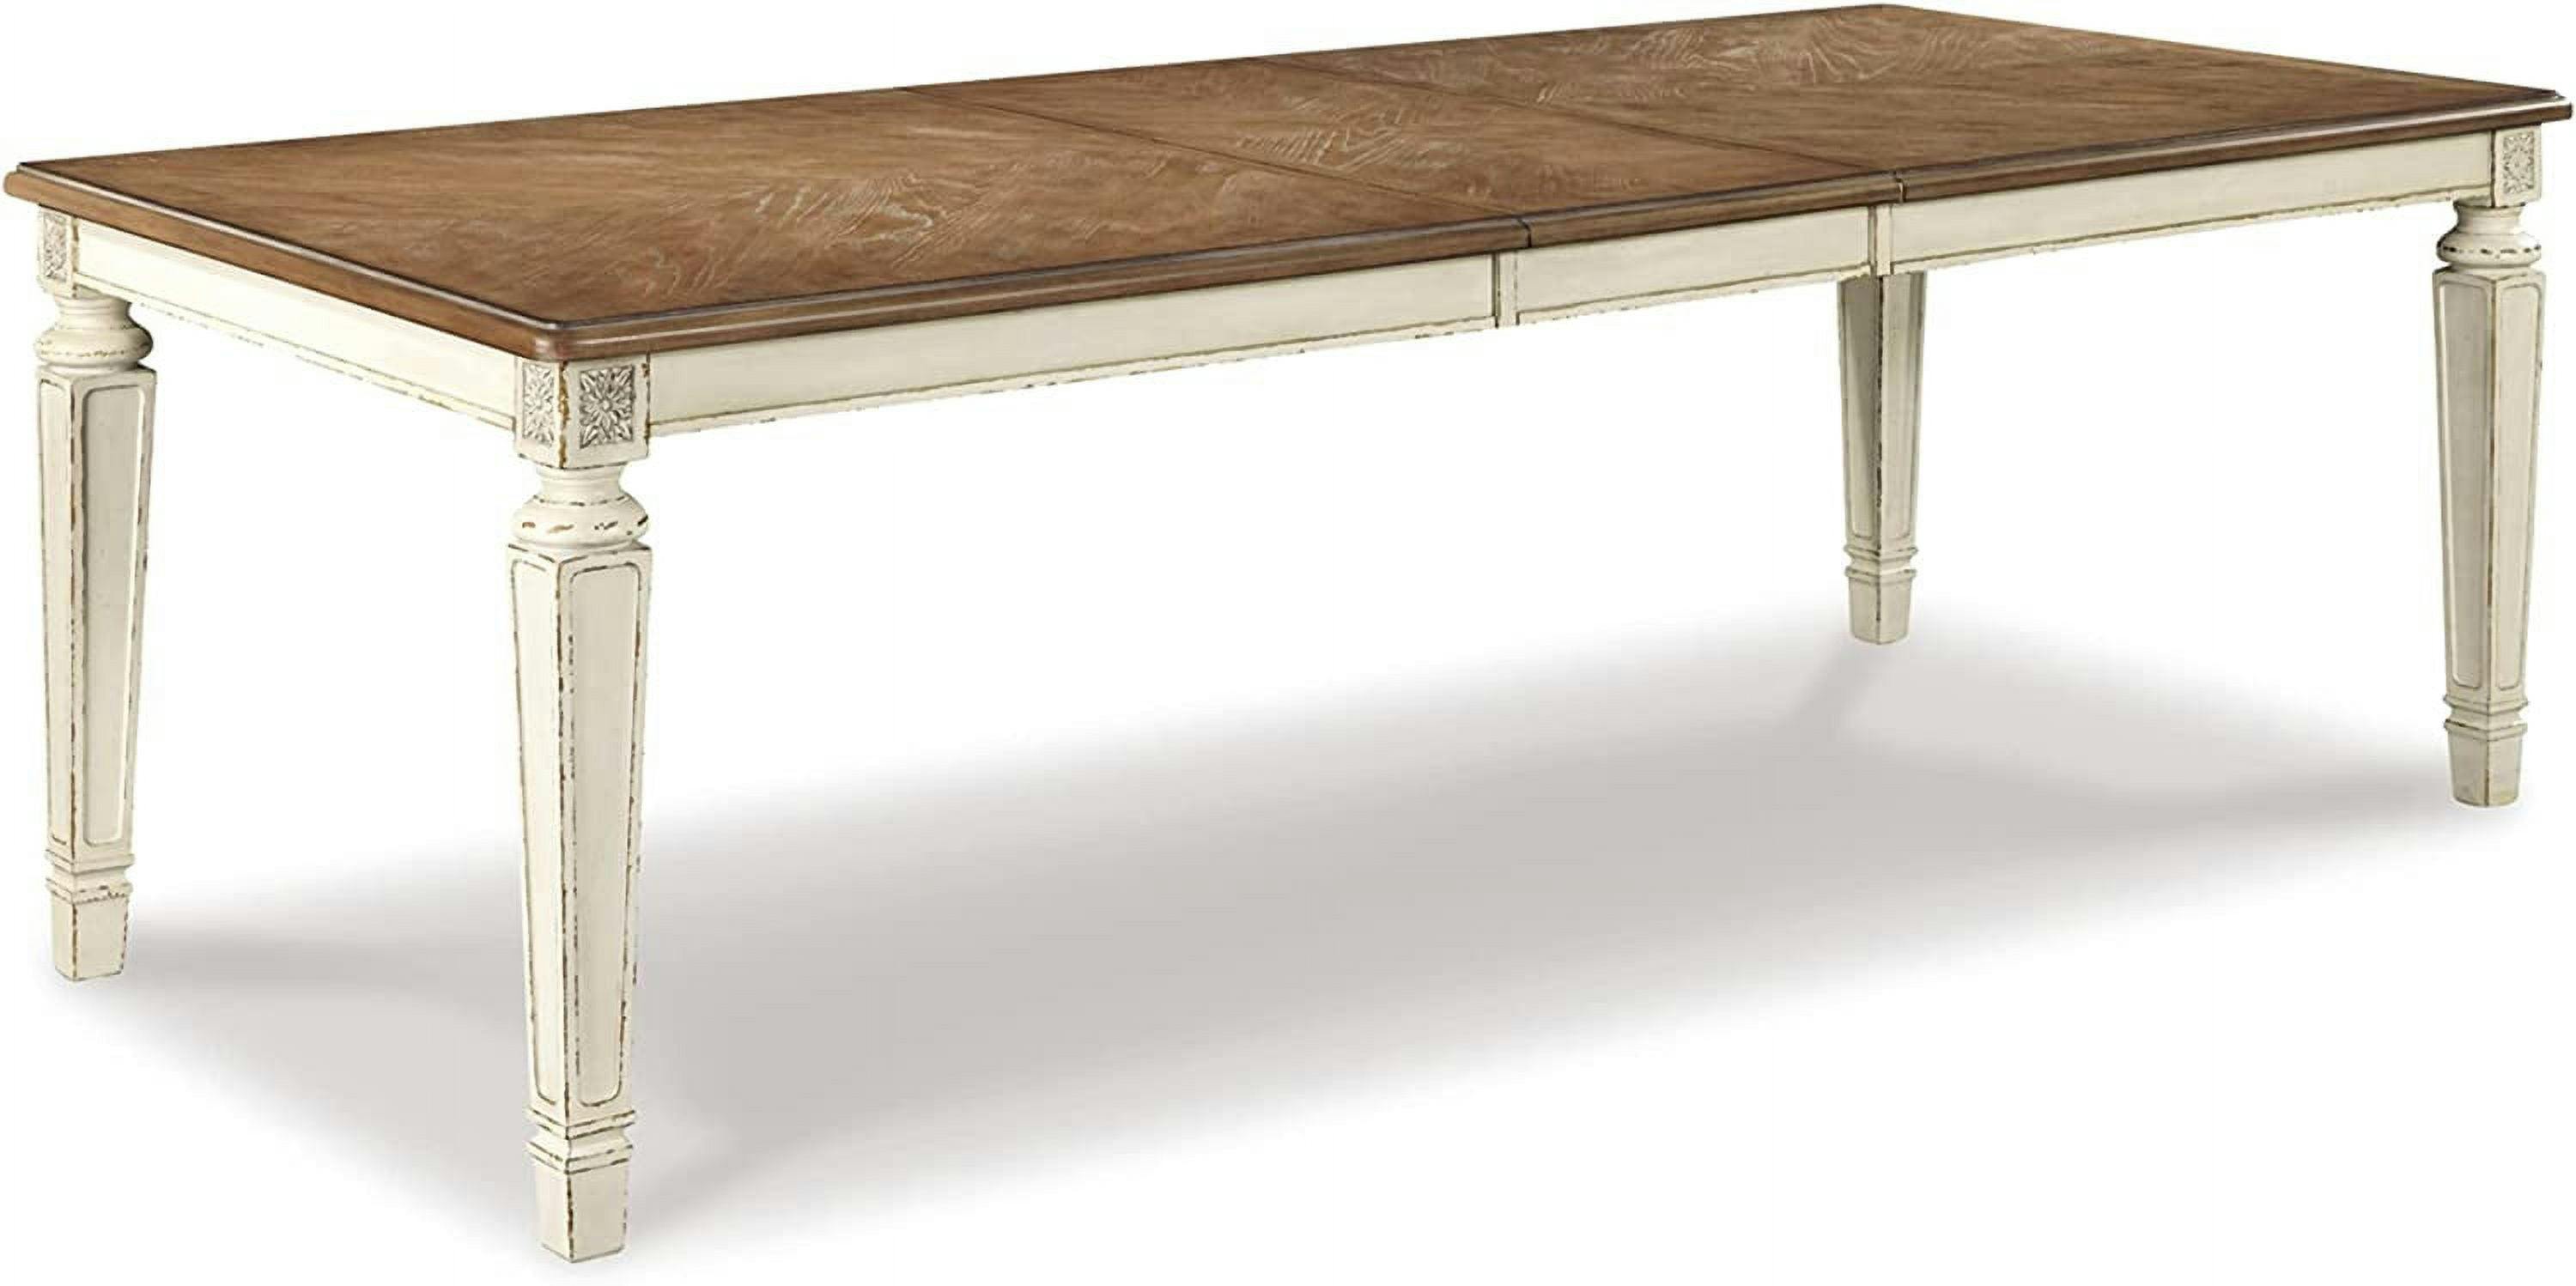 Chipped White & Distressed Wood Extendable Dining Table